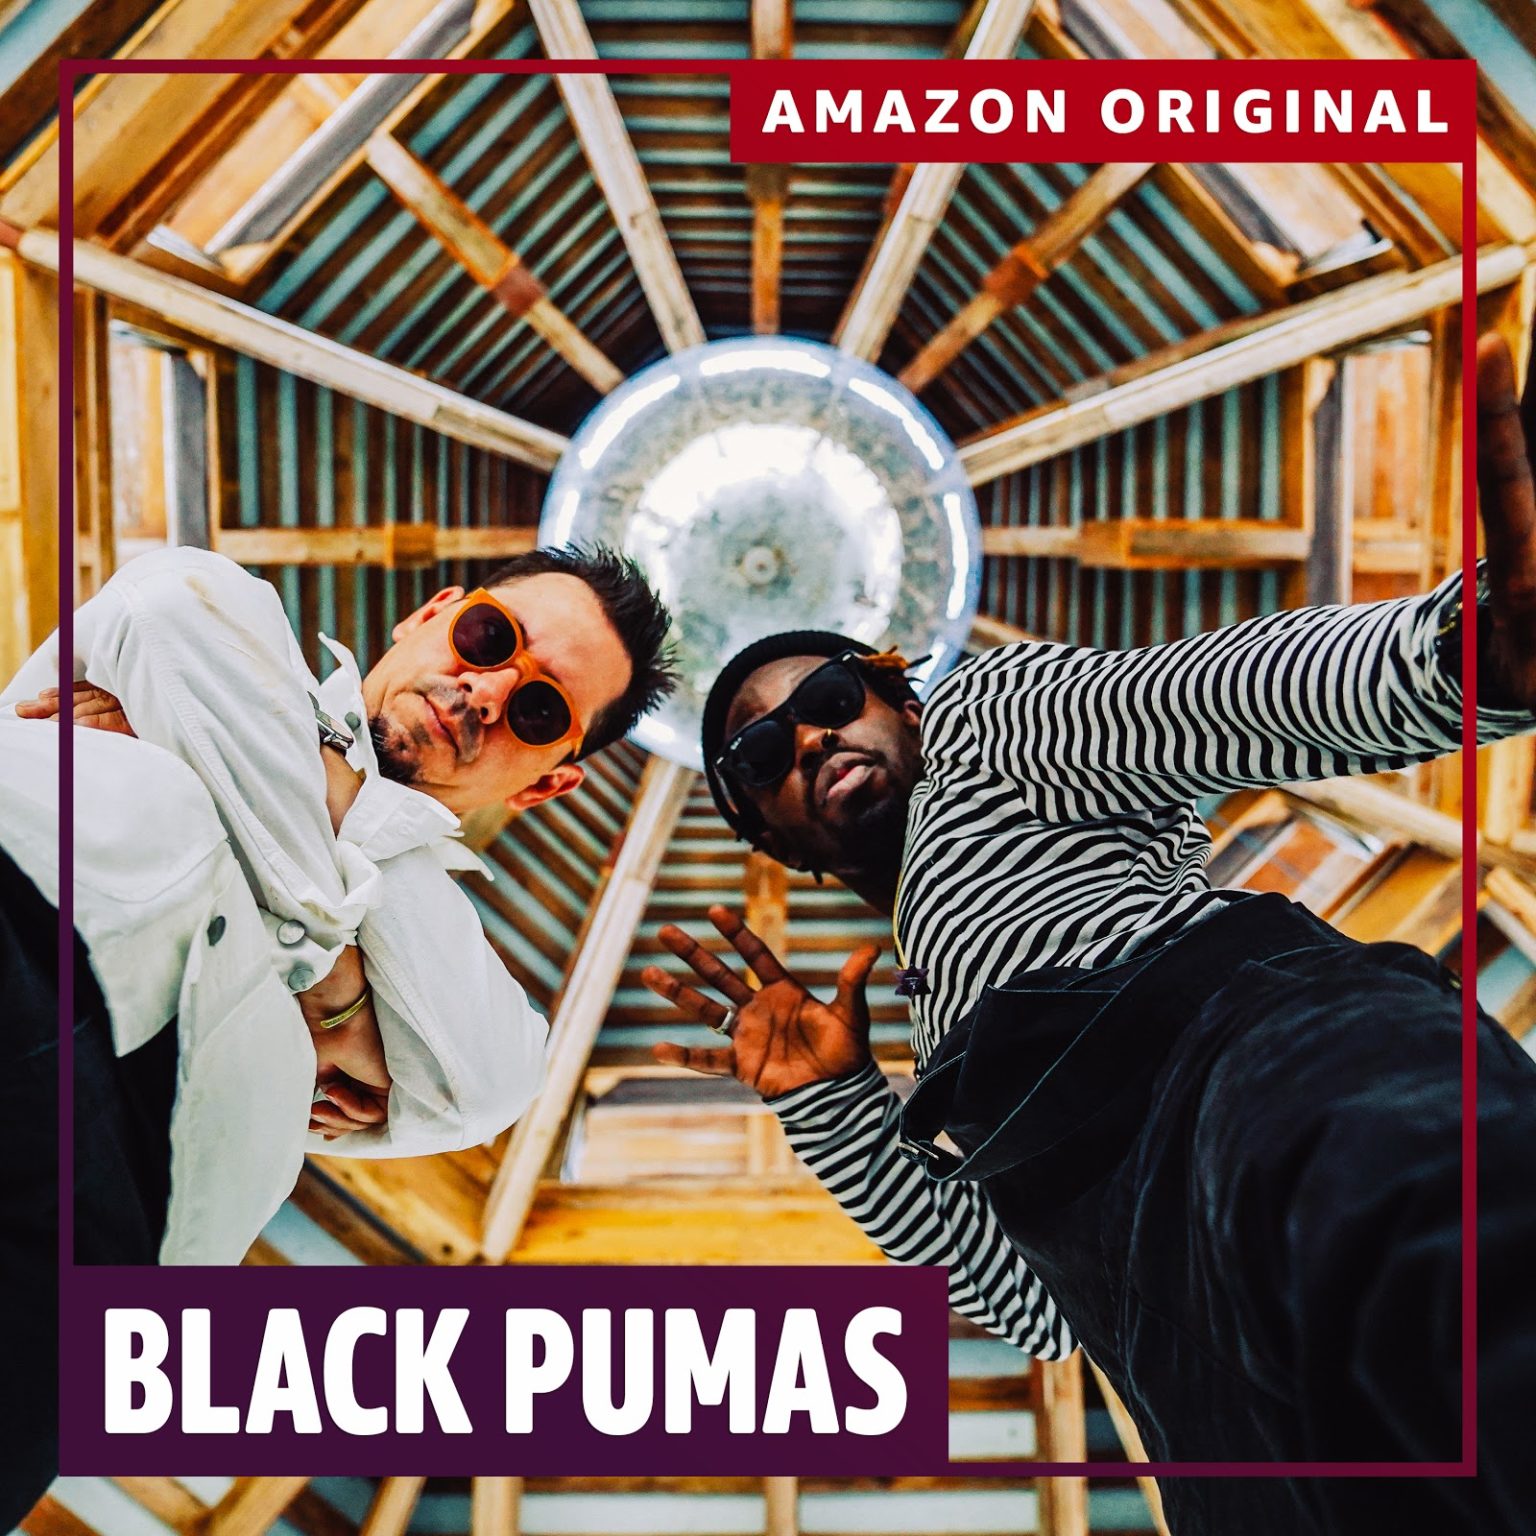 Black Pumas Release New Amazon Original EP 'The Electric Deluxe Sessions.' The album contains new versions of "Colors" “Fire,” and “Know You Better”